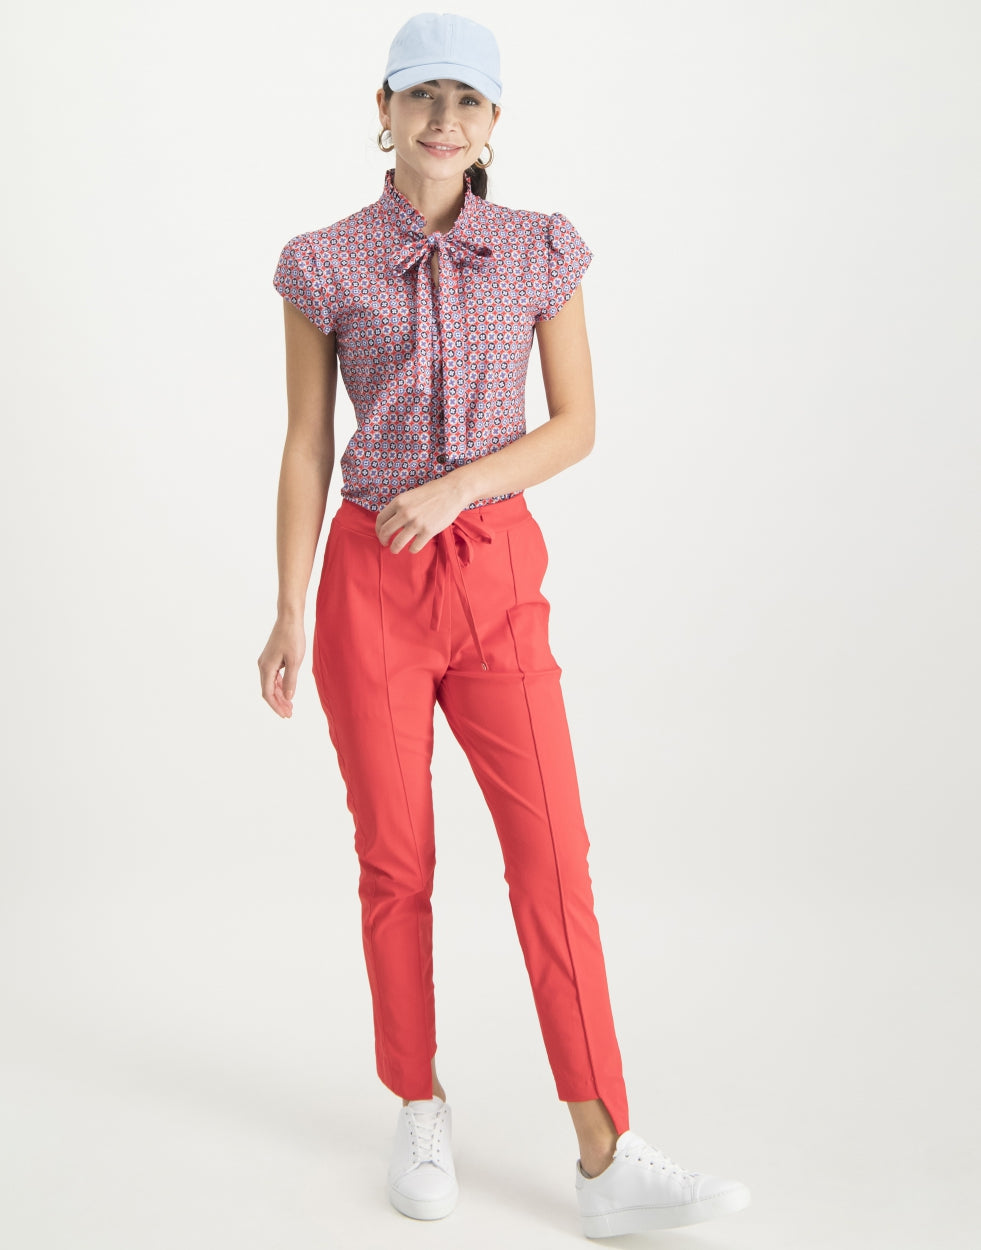 Tash Pussybow Blouse Graphic | White/Red